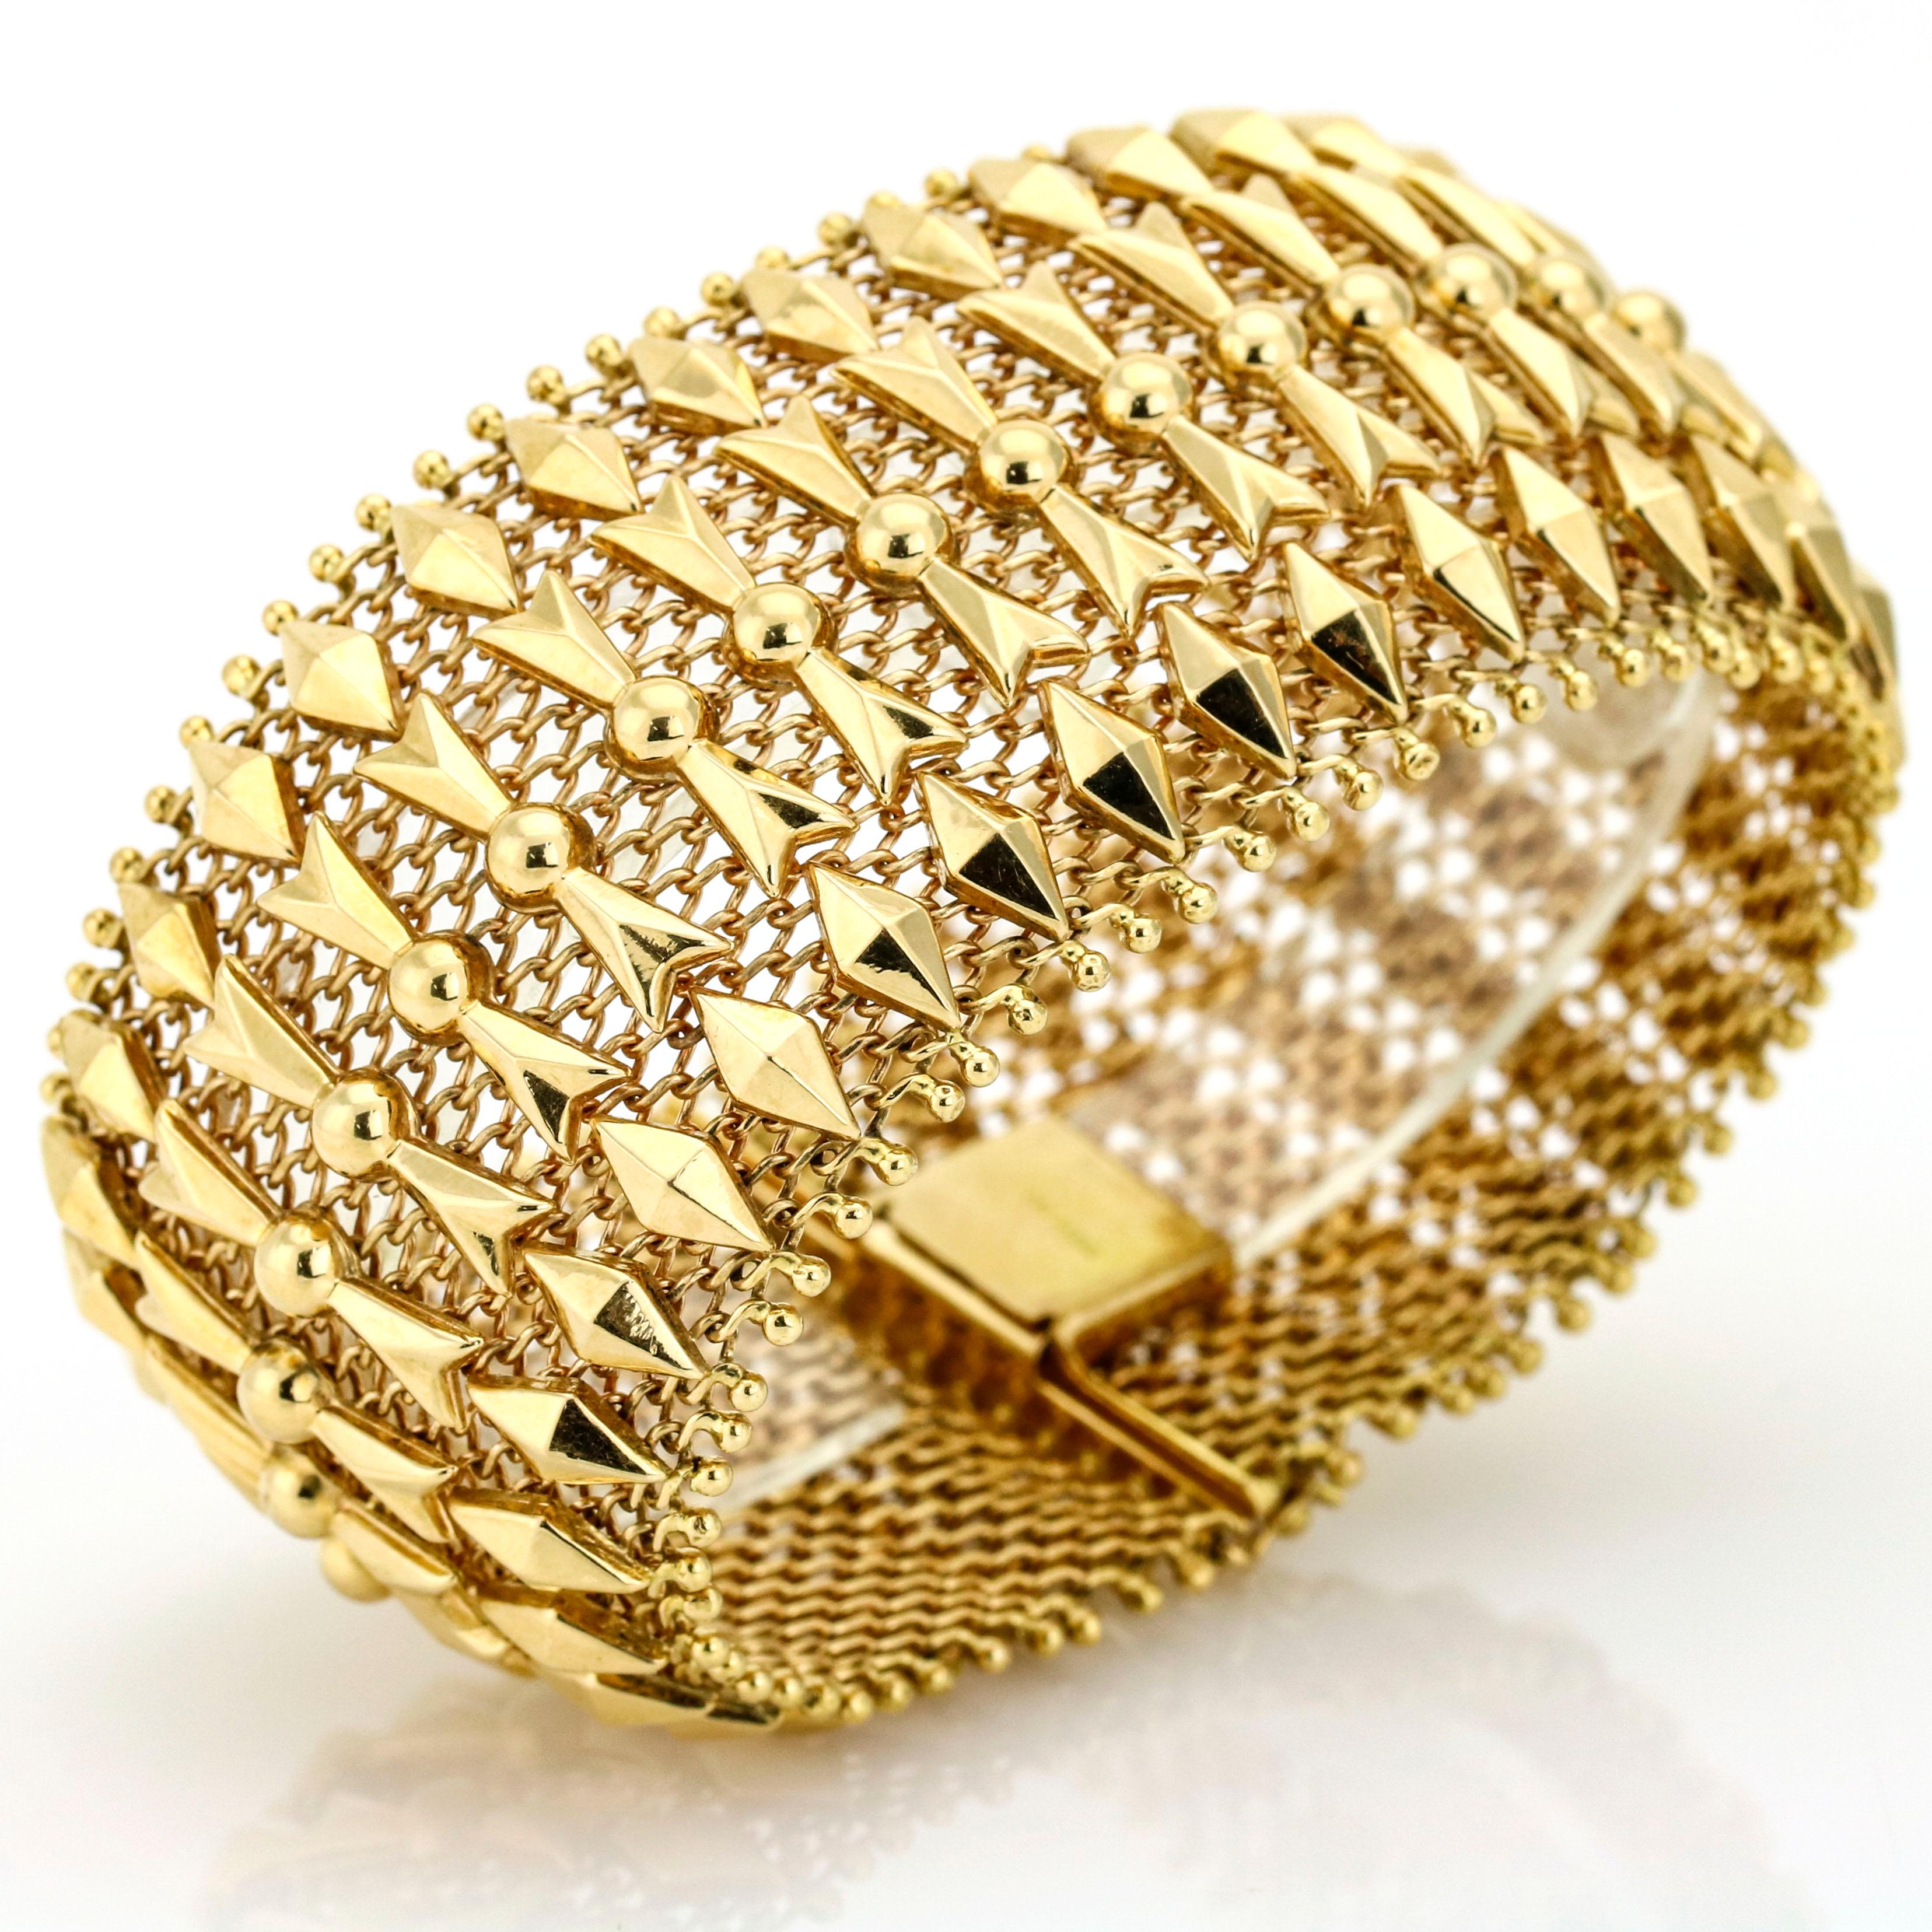 Vintage mesh bracelet in 18-karat yellow gold. Signed 255 VI. Slide clasp with safety. Made in Italy.

Size, Medium